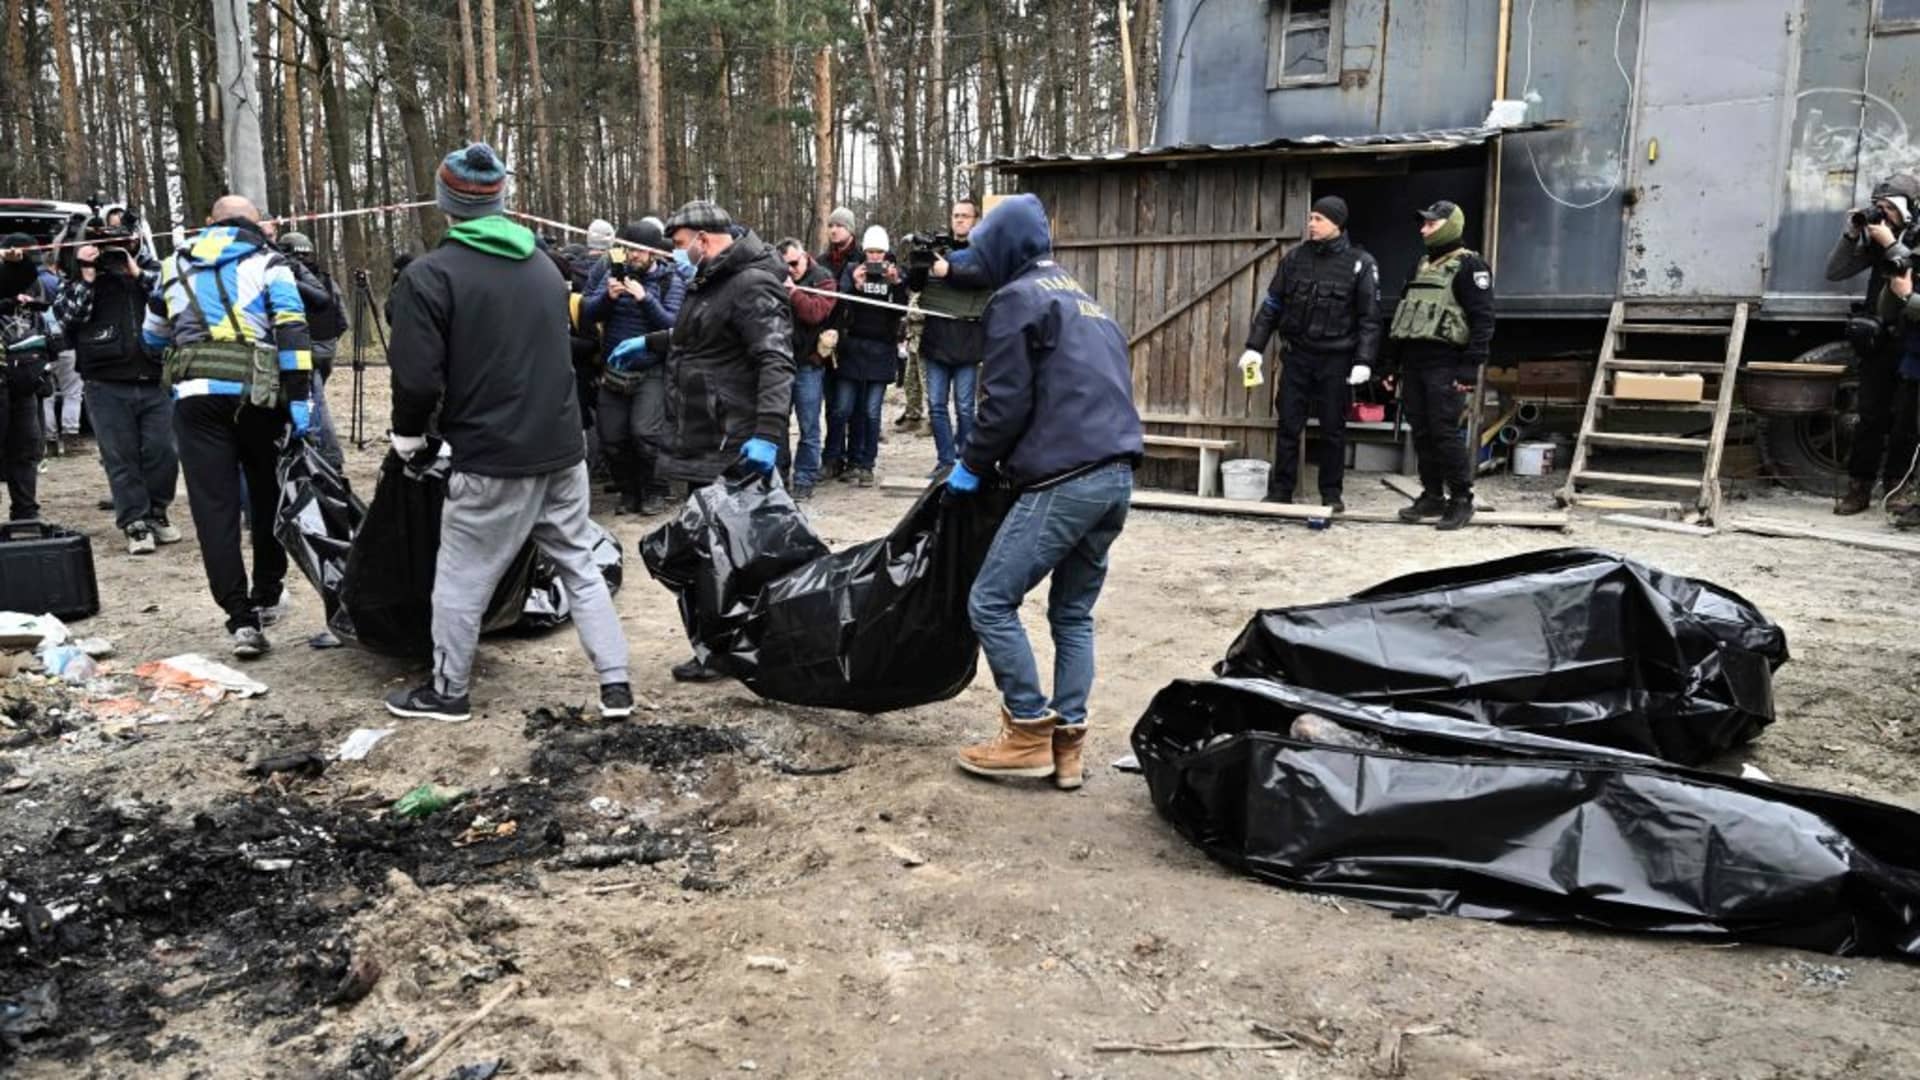 EDITORS NOTE: Graphic content / City workers carry body bags with six partially burnt bodies found in the town of Bucha on April 5, 2022, as Ukrainian officials say over 400 civilian bodies have been recovered from the wider Kyiv region, many of which were buried in mass graves.